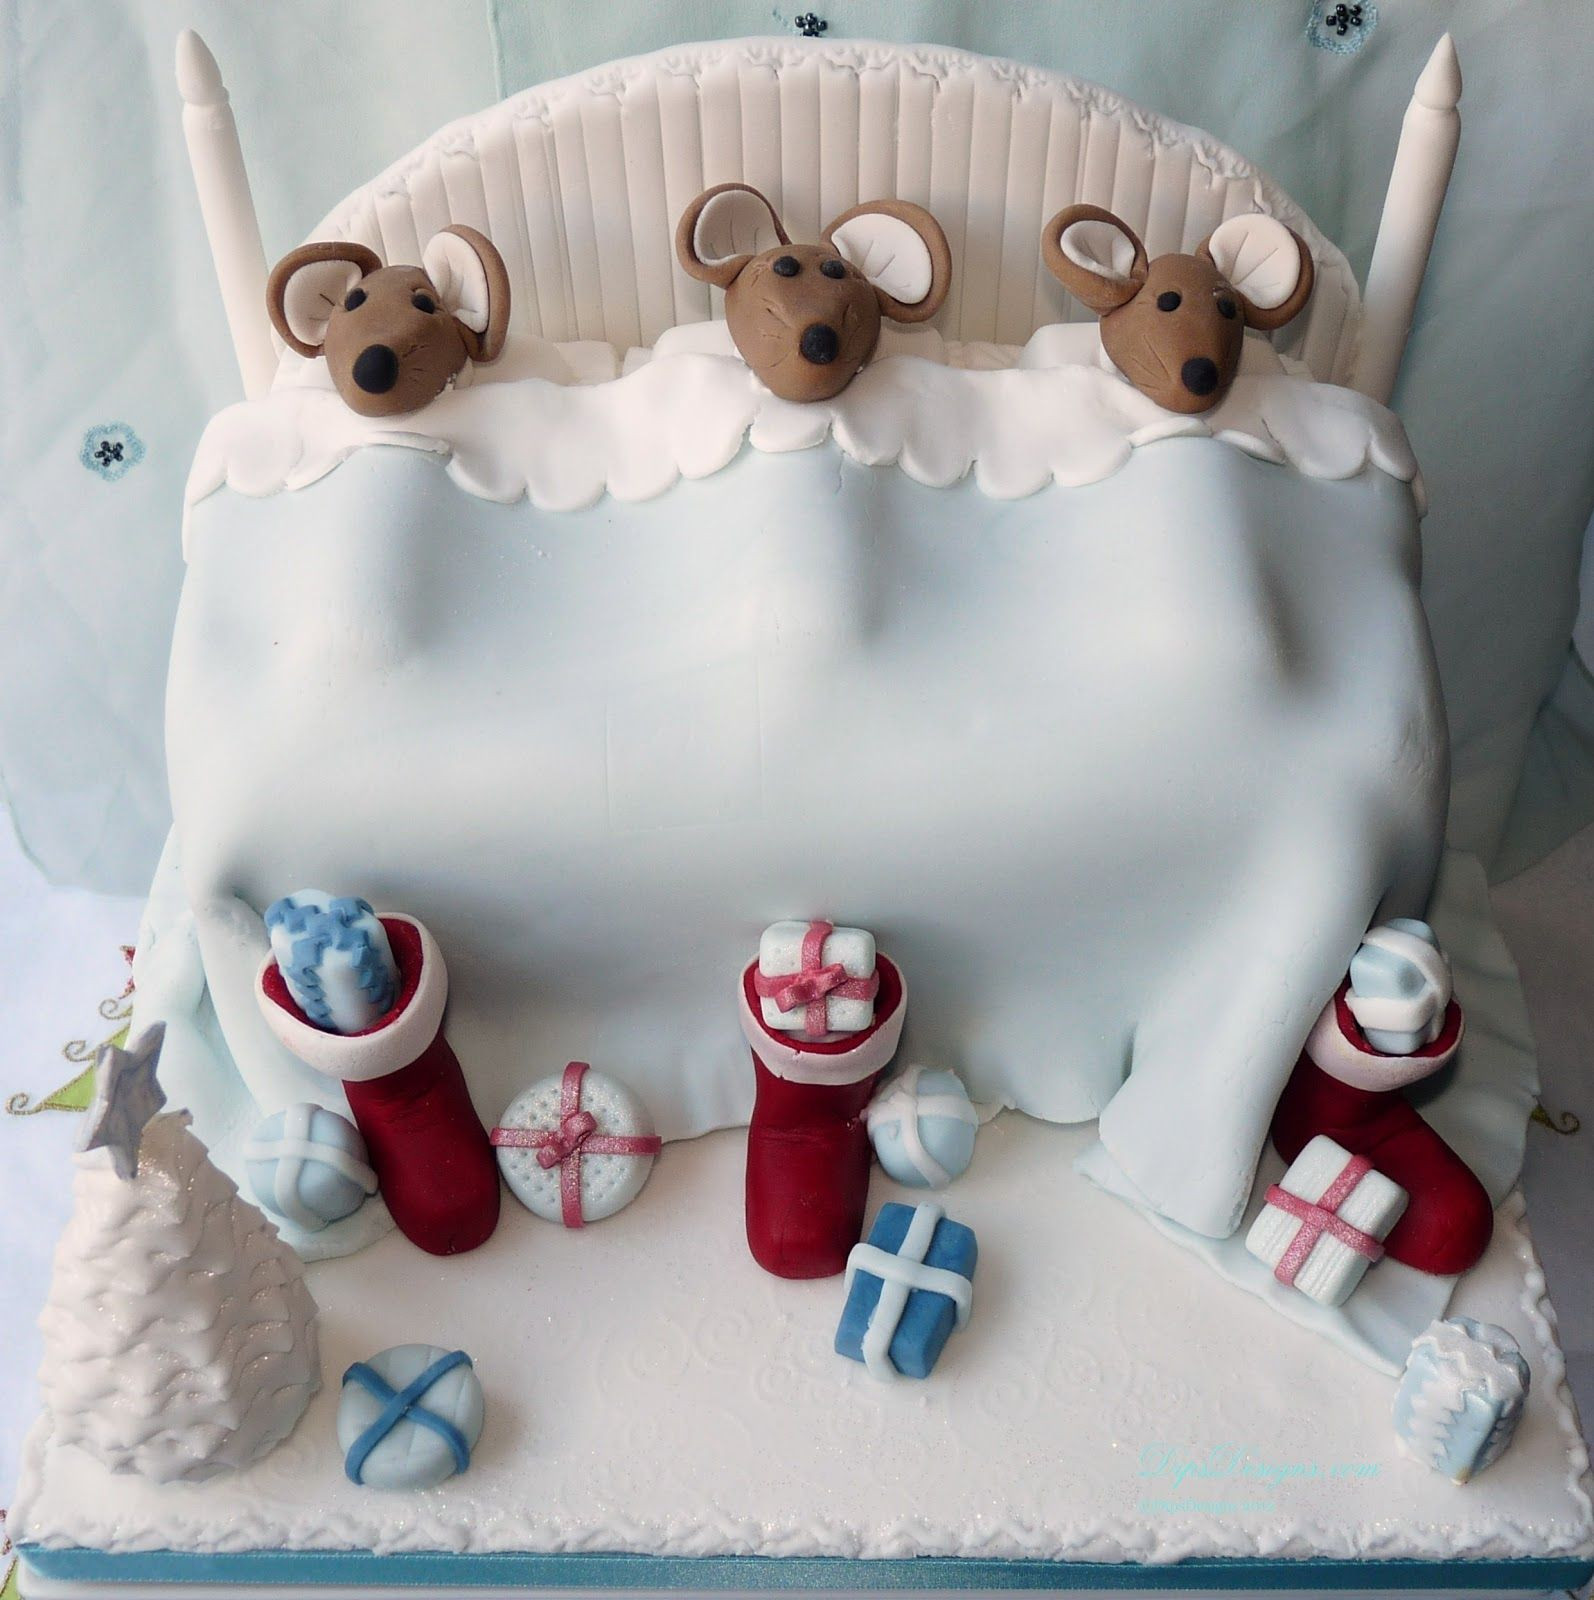 Christmas Cakes For Kids
 55 Christmas Cake and Cookies Ideas for Kids